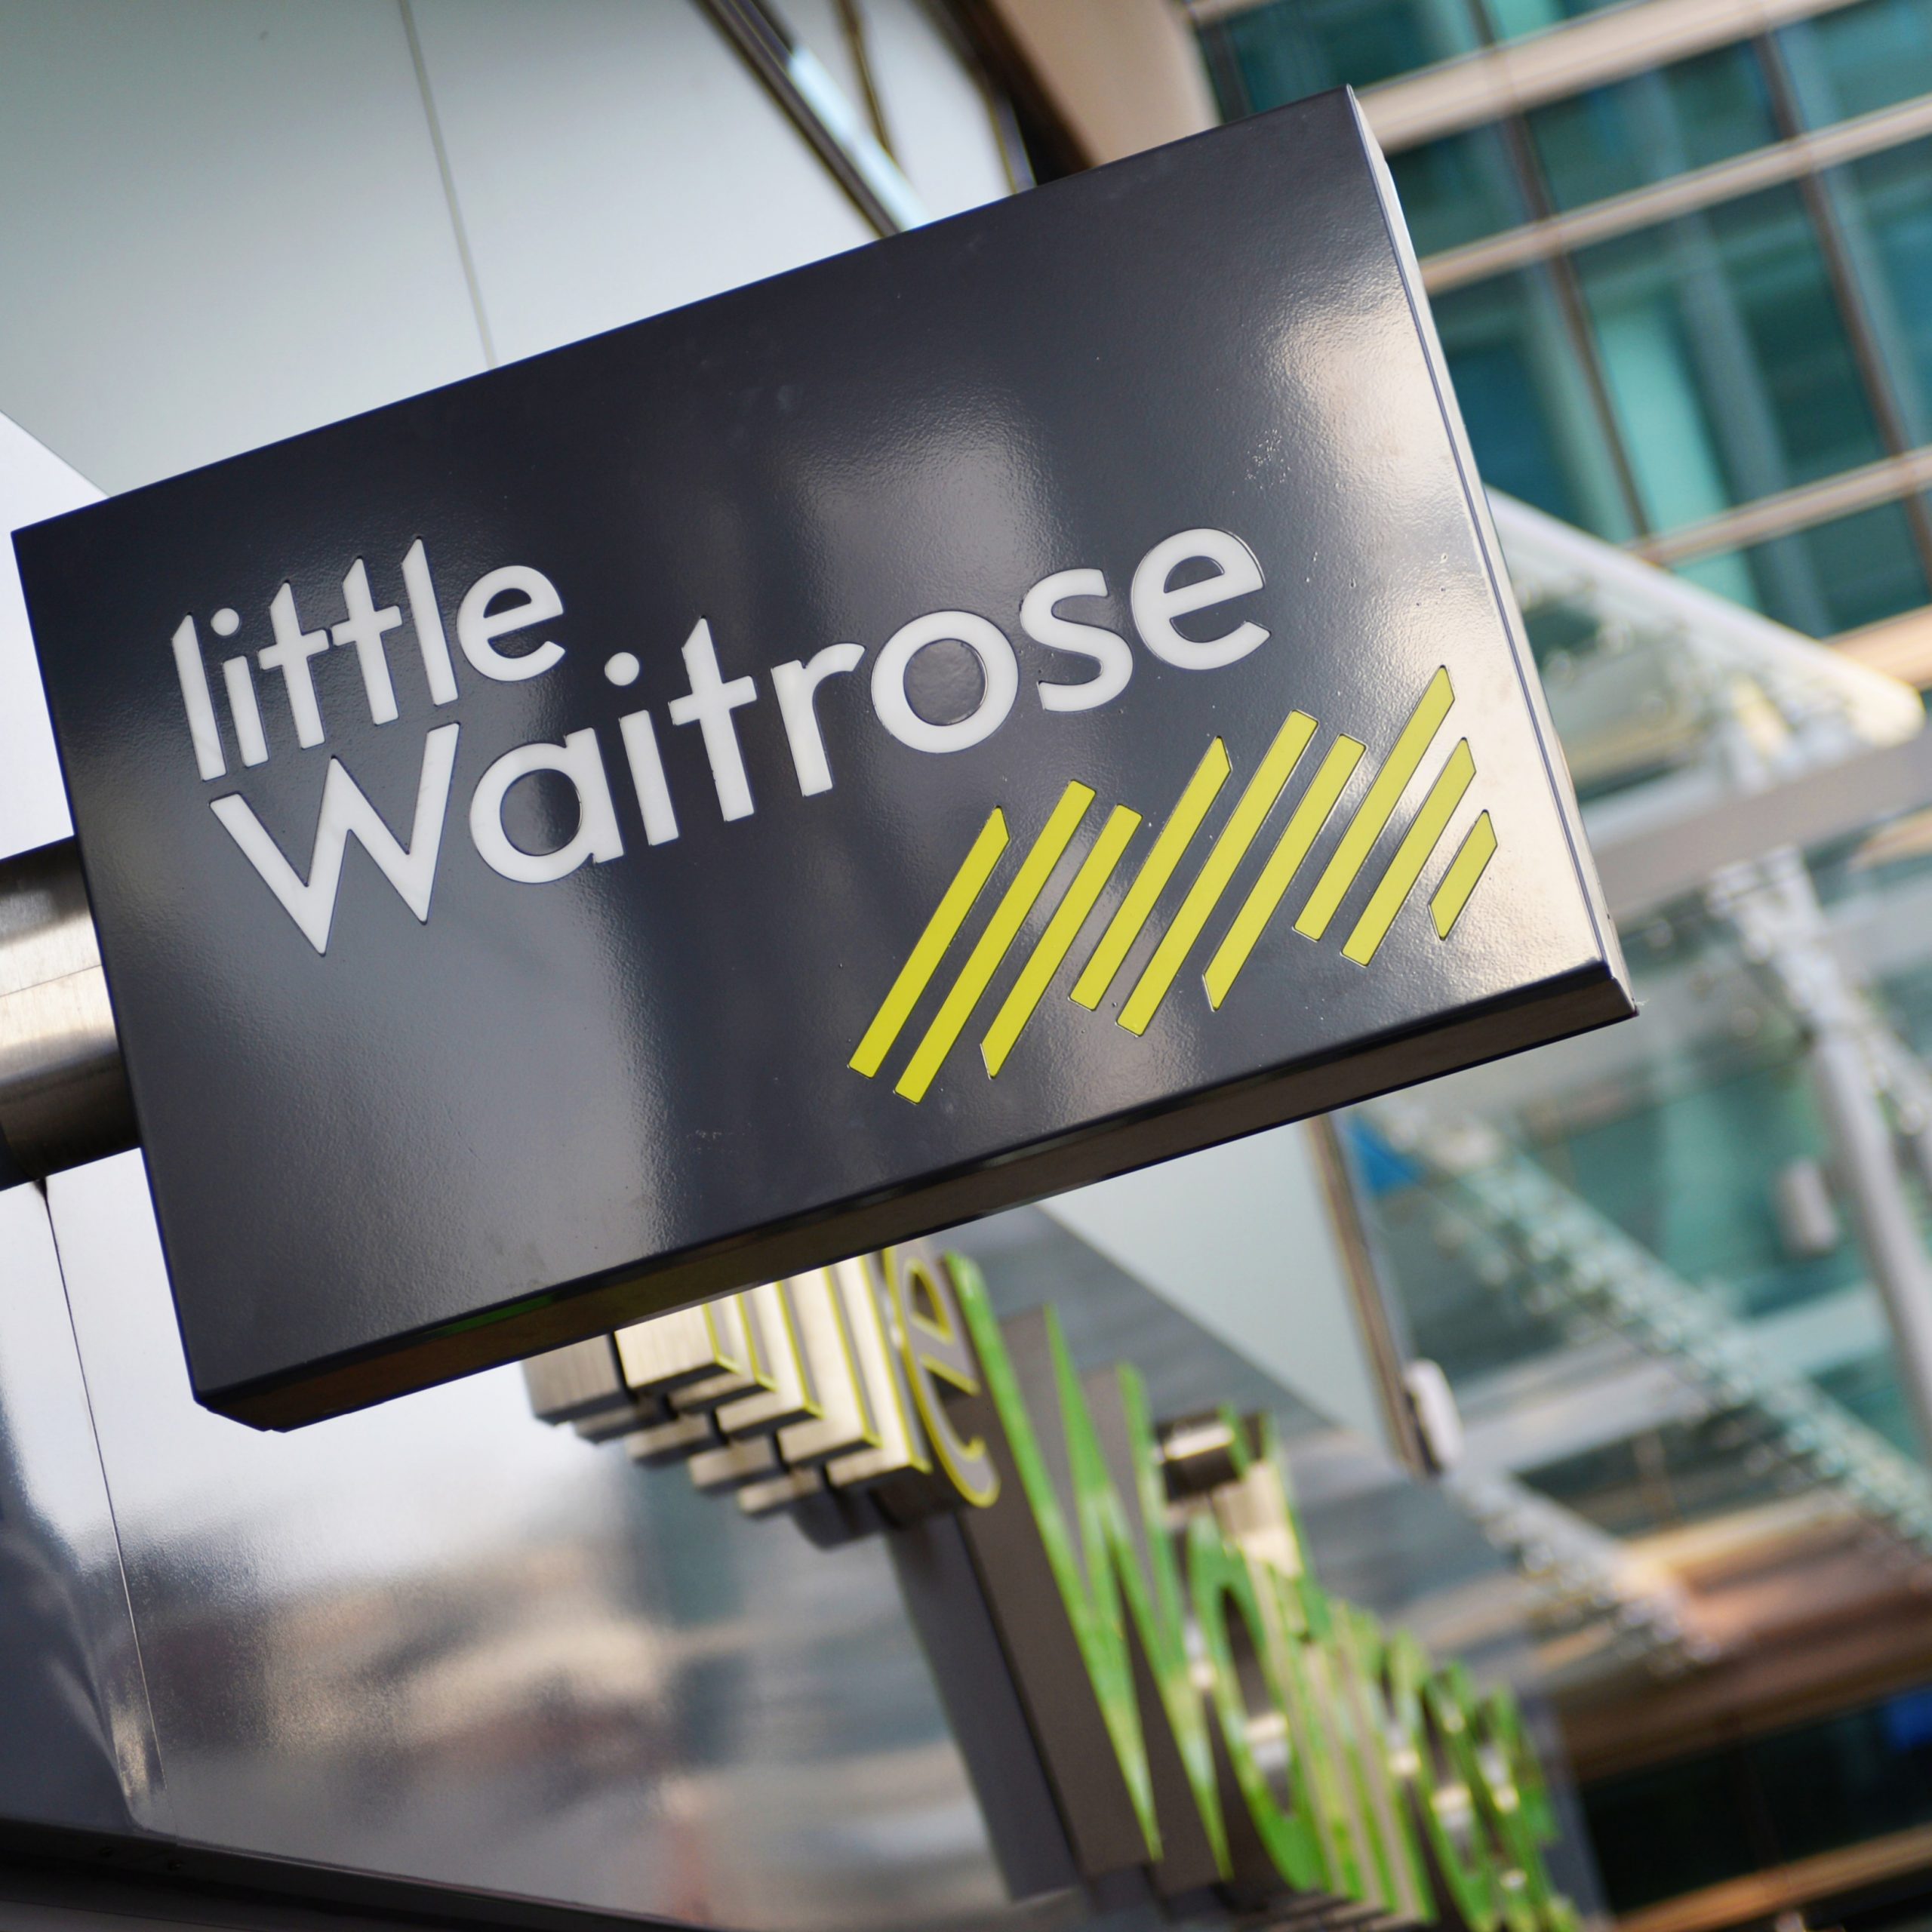 Last year Waitrose opened another 20 ‘little Waitrose’ convenience shops and 13 new core shops. It now has 339 shops in England, Scotland, Wales and the Channel Islands, including 61 convenience shops.